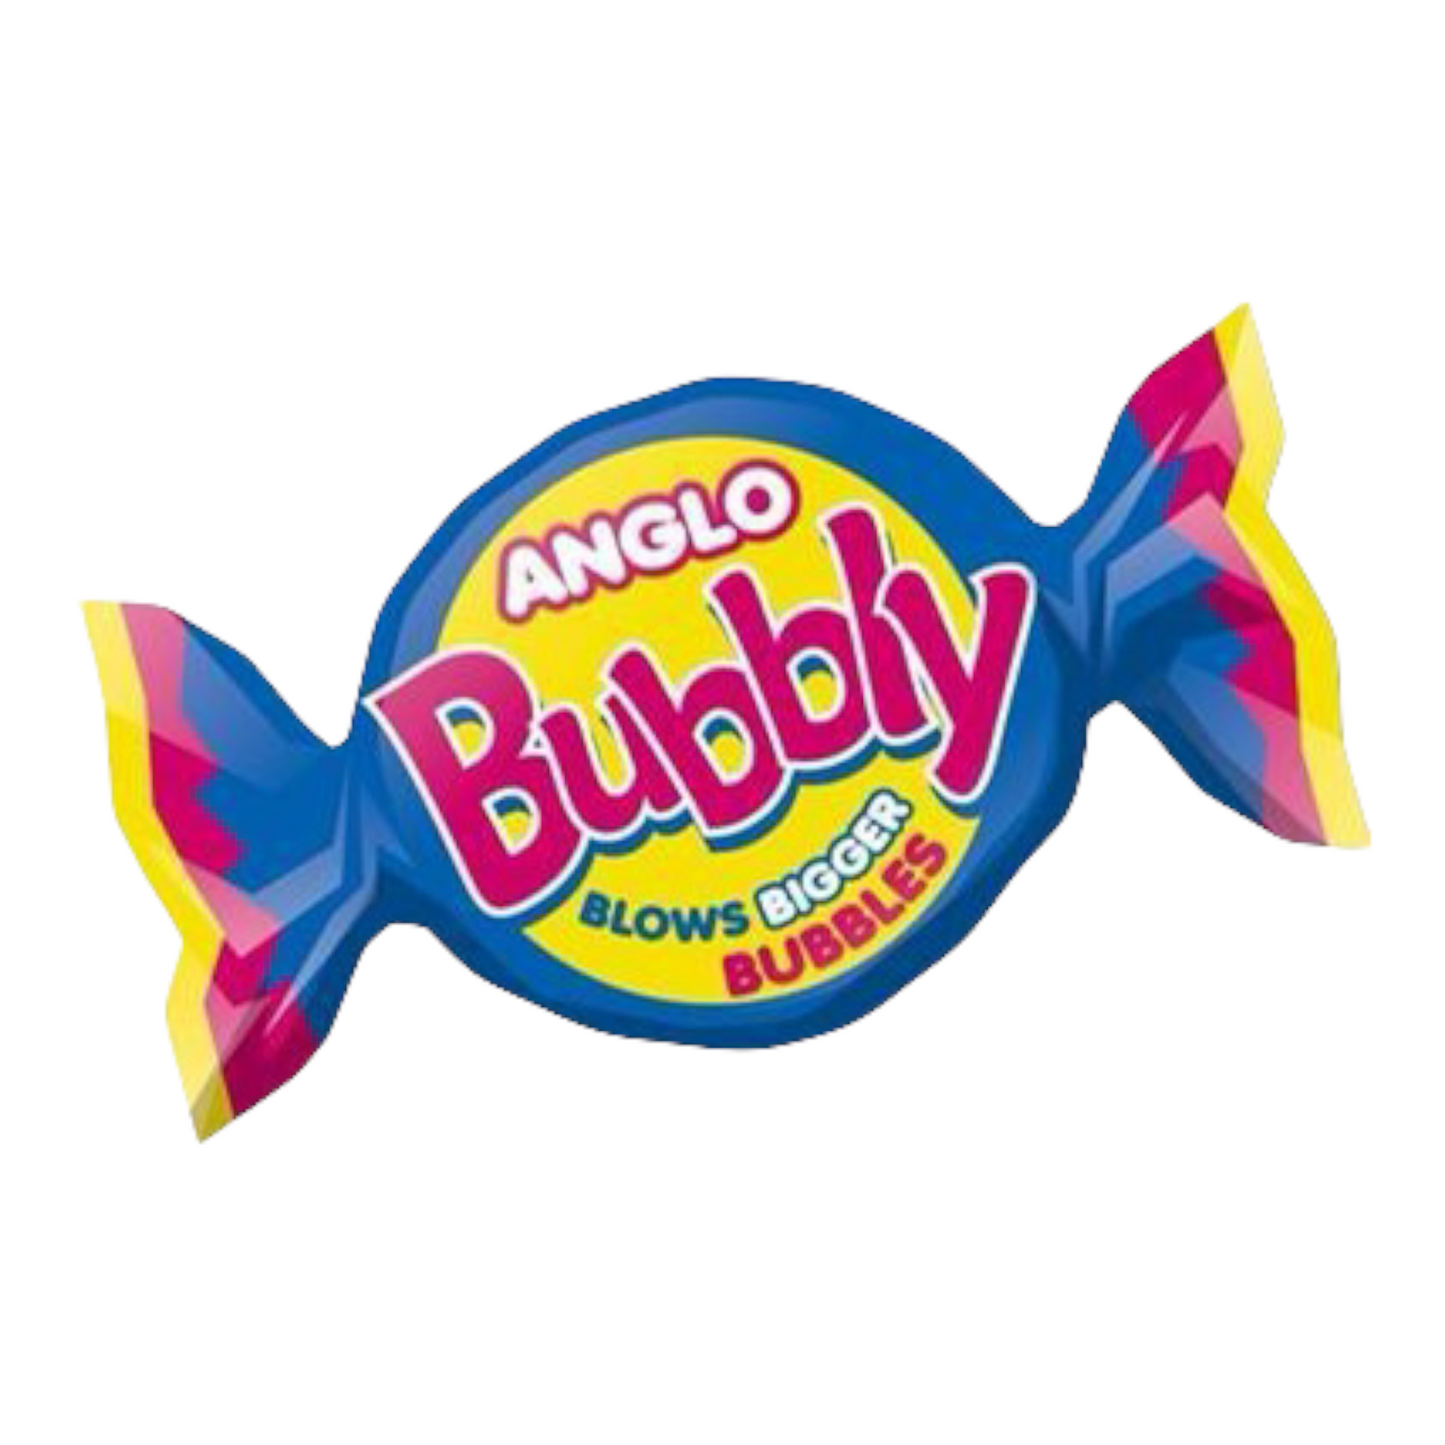 Anglo Bubbly - Single piece